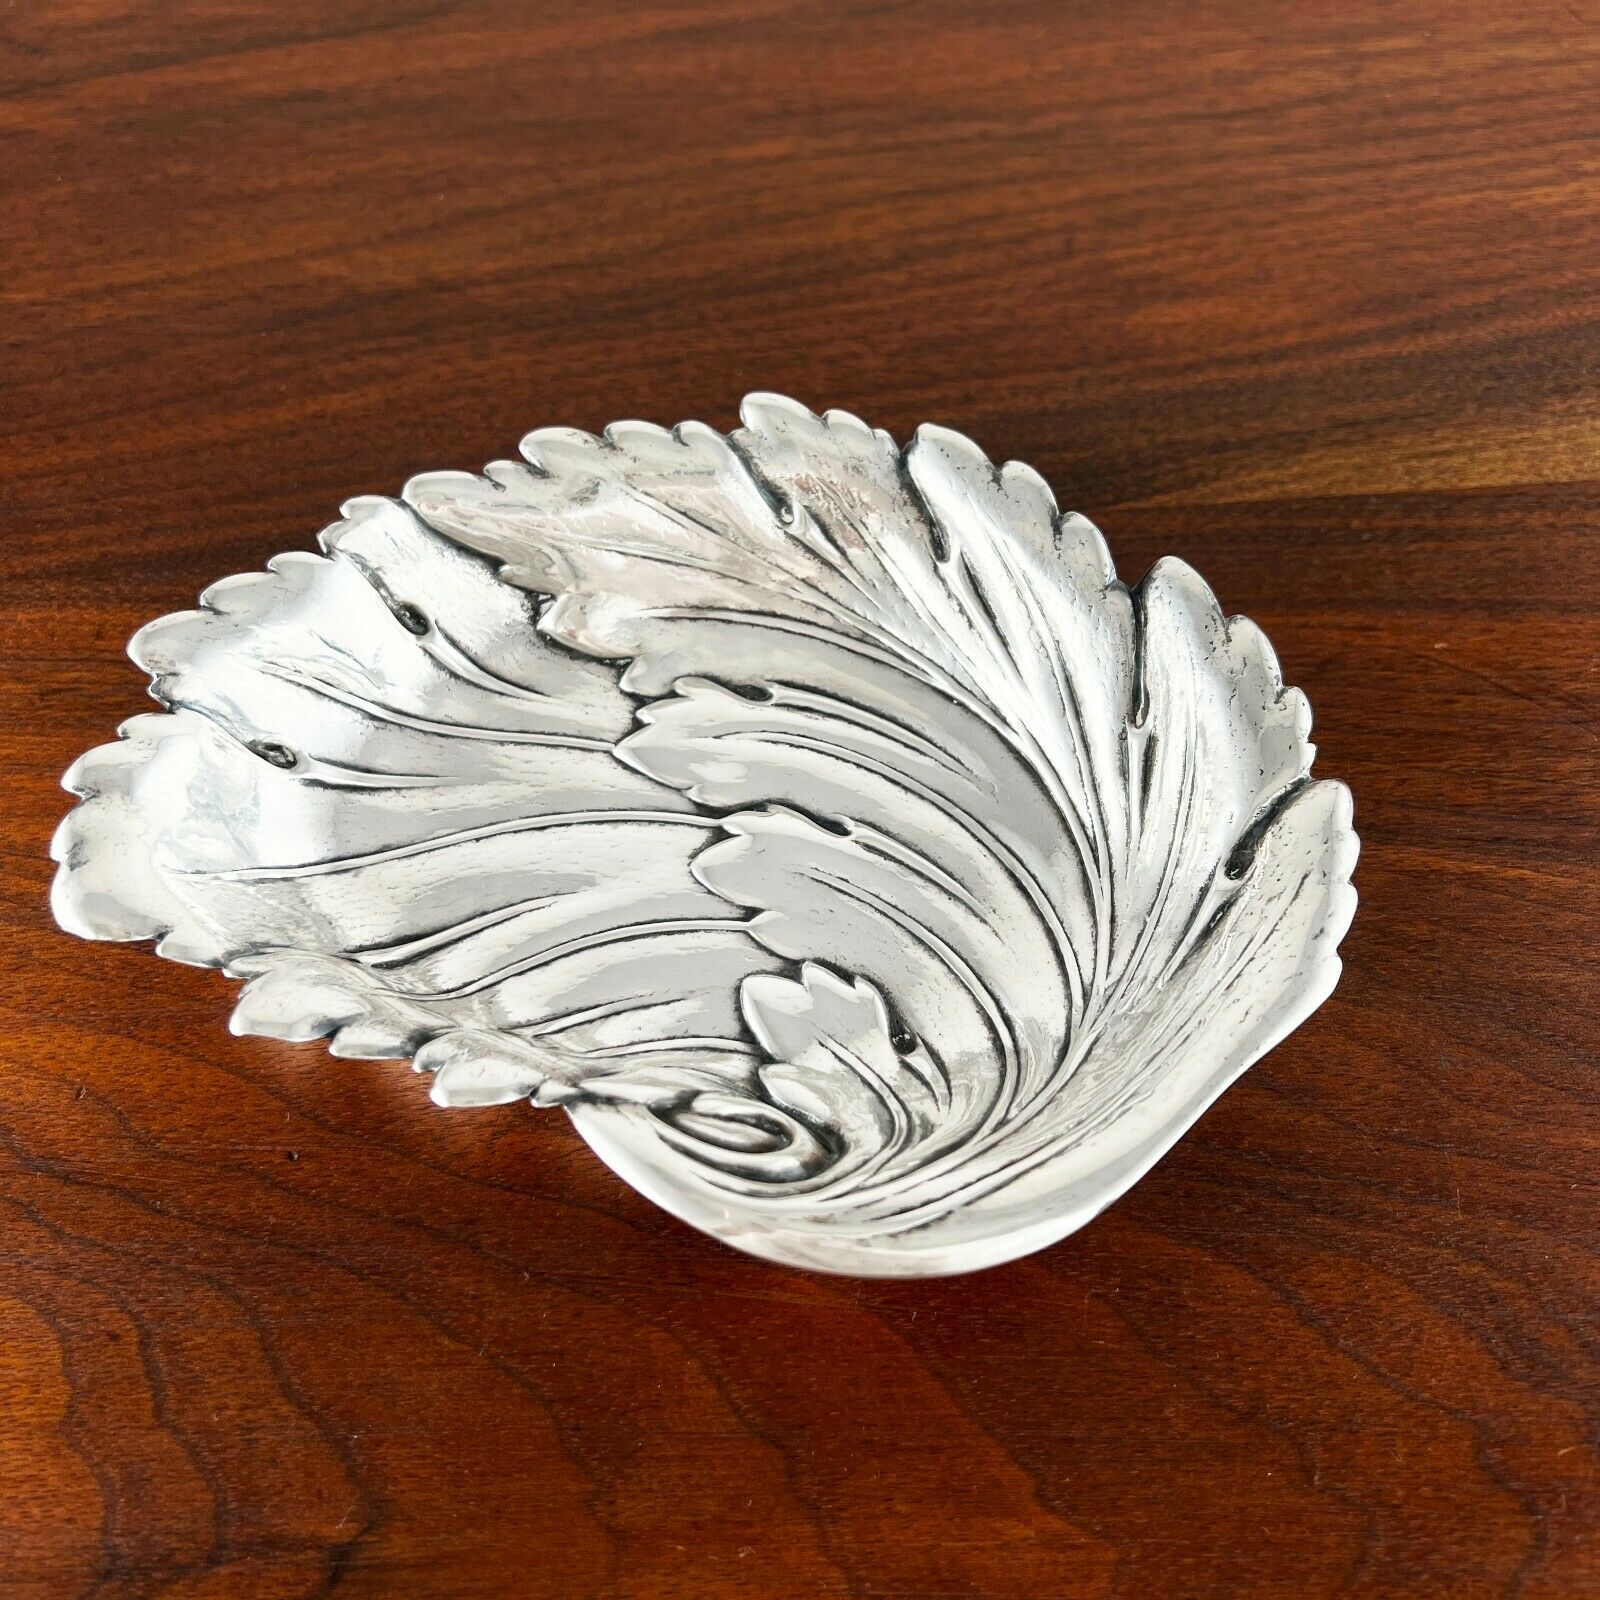 Antique Valuations: FIGURAL INTERNATIONAL AMERICAN AESTHETIC STERLING SILVER DISH / BOWL LEAF FORM